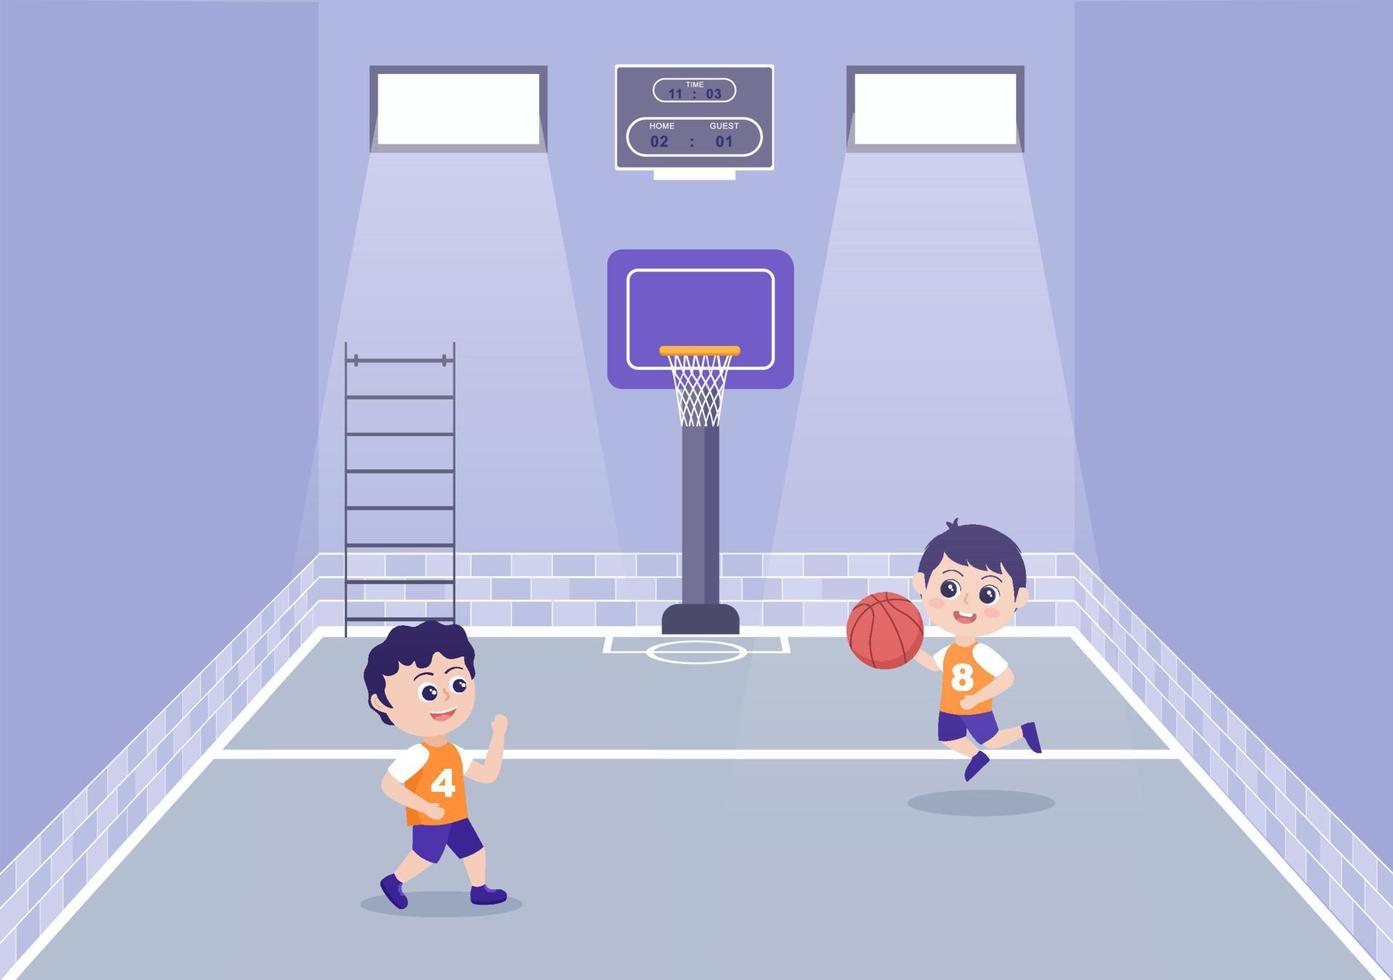 Happy Kids Cartoon Playing Basketball Flat Design Illustration Wearing Basket Uniform in Outdoor Court for Background, Poster or Banner vector